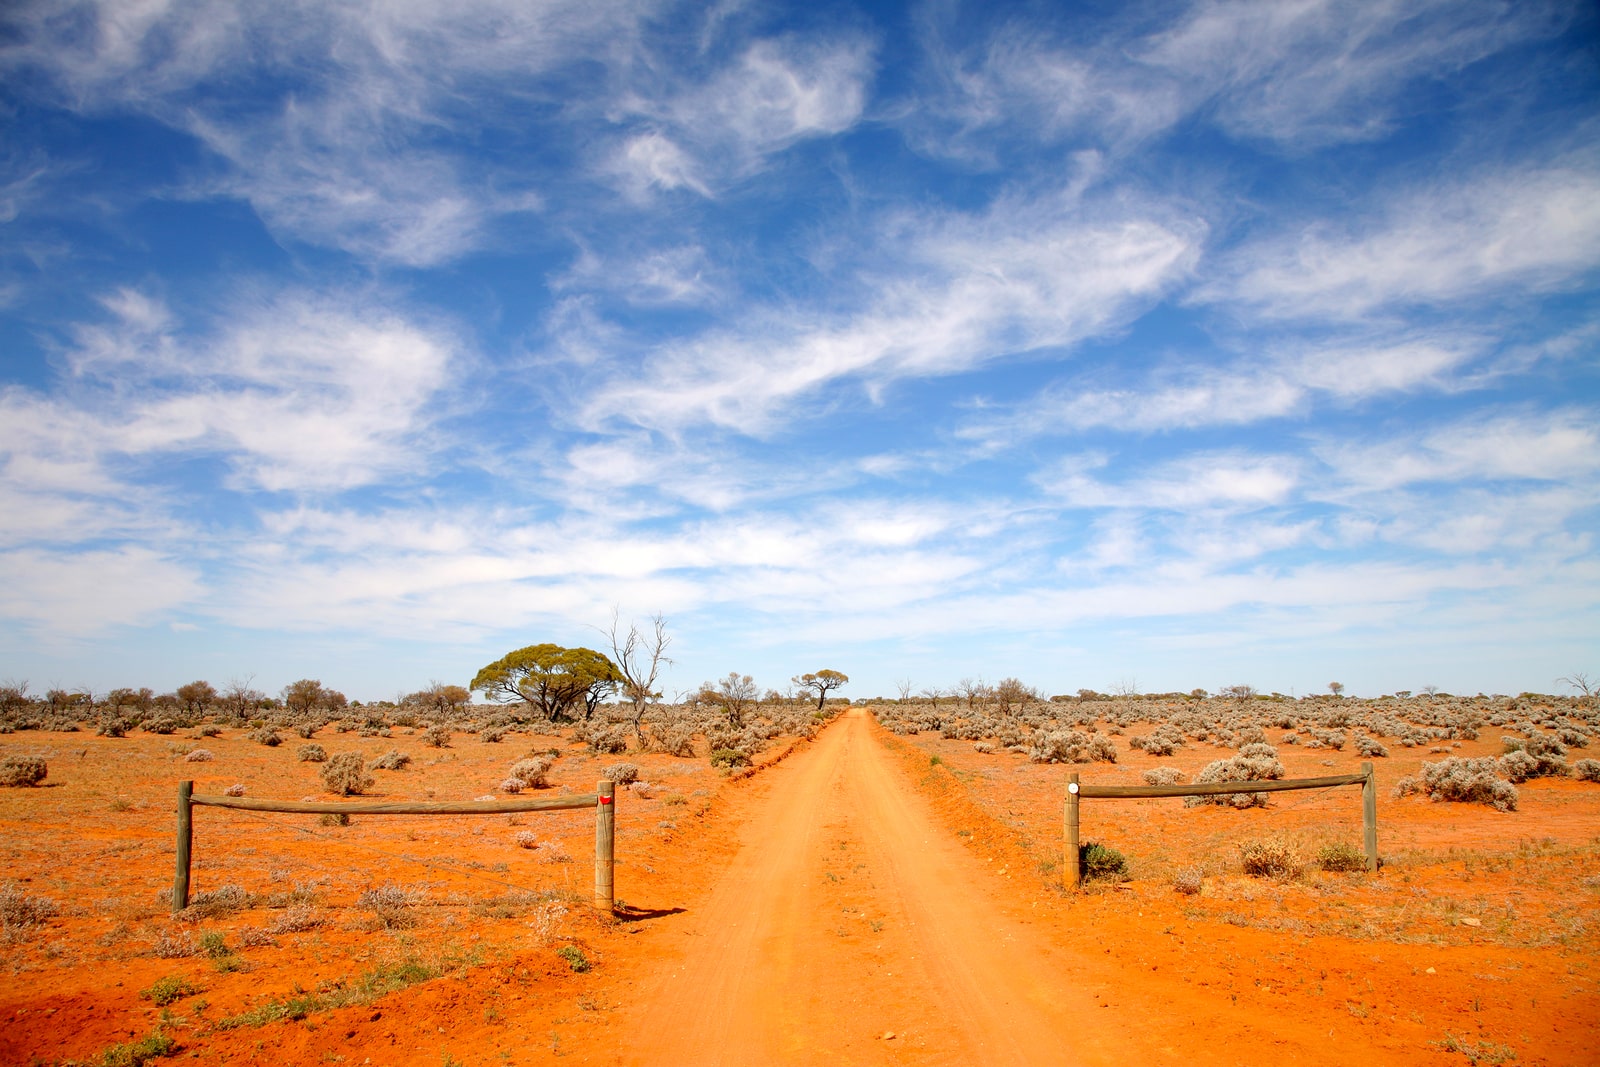 Remote dirt outback road in central Australia